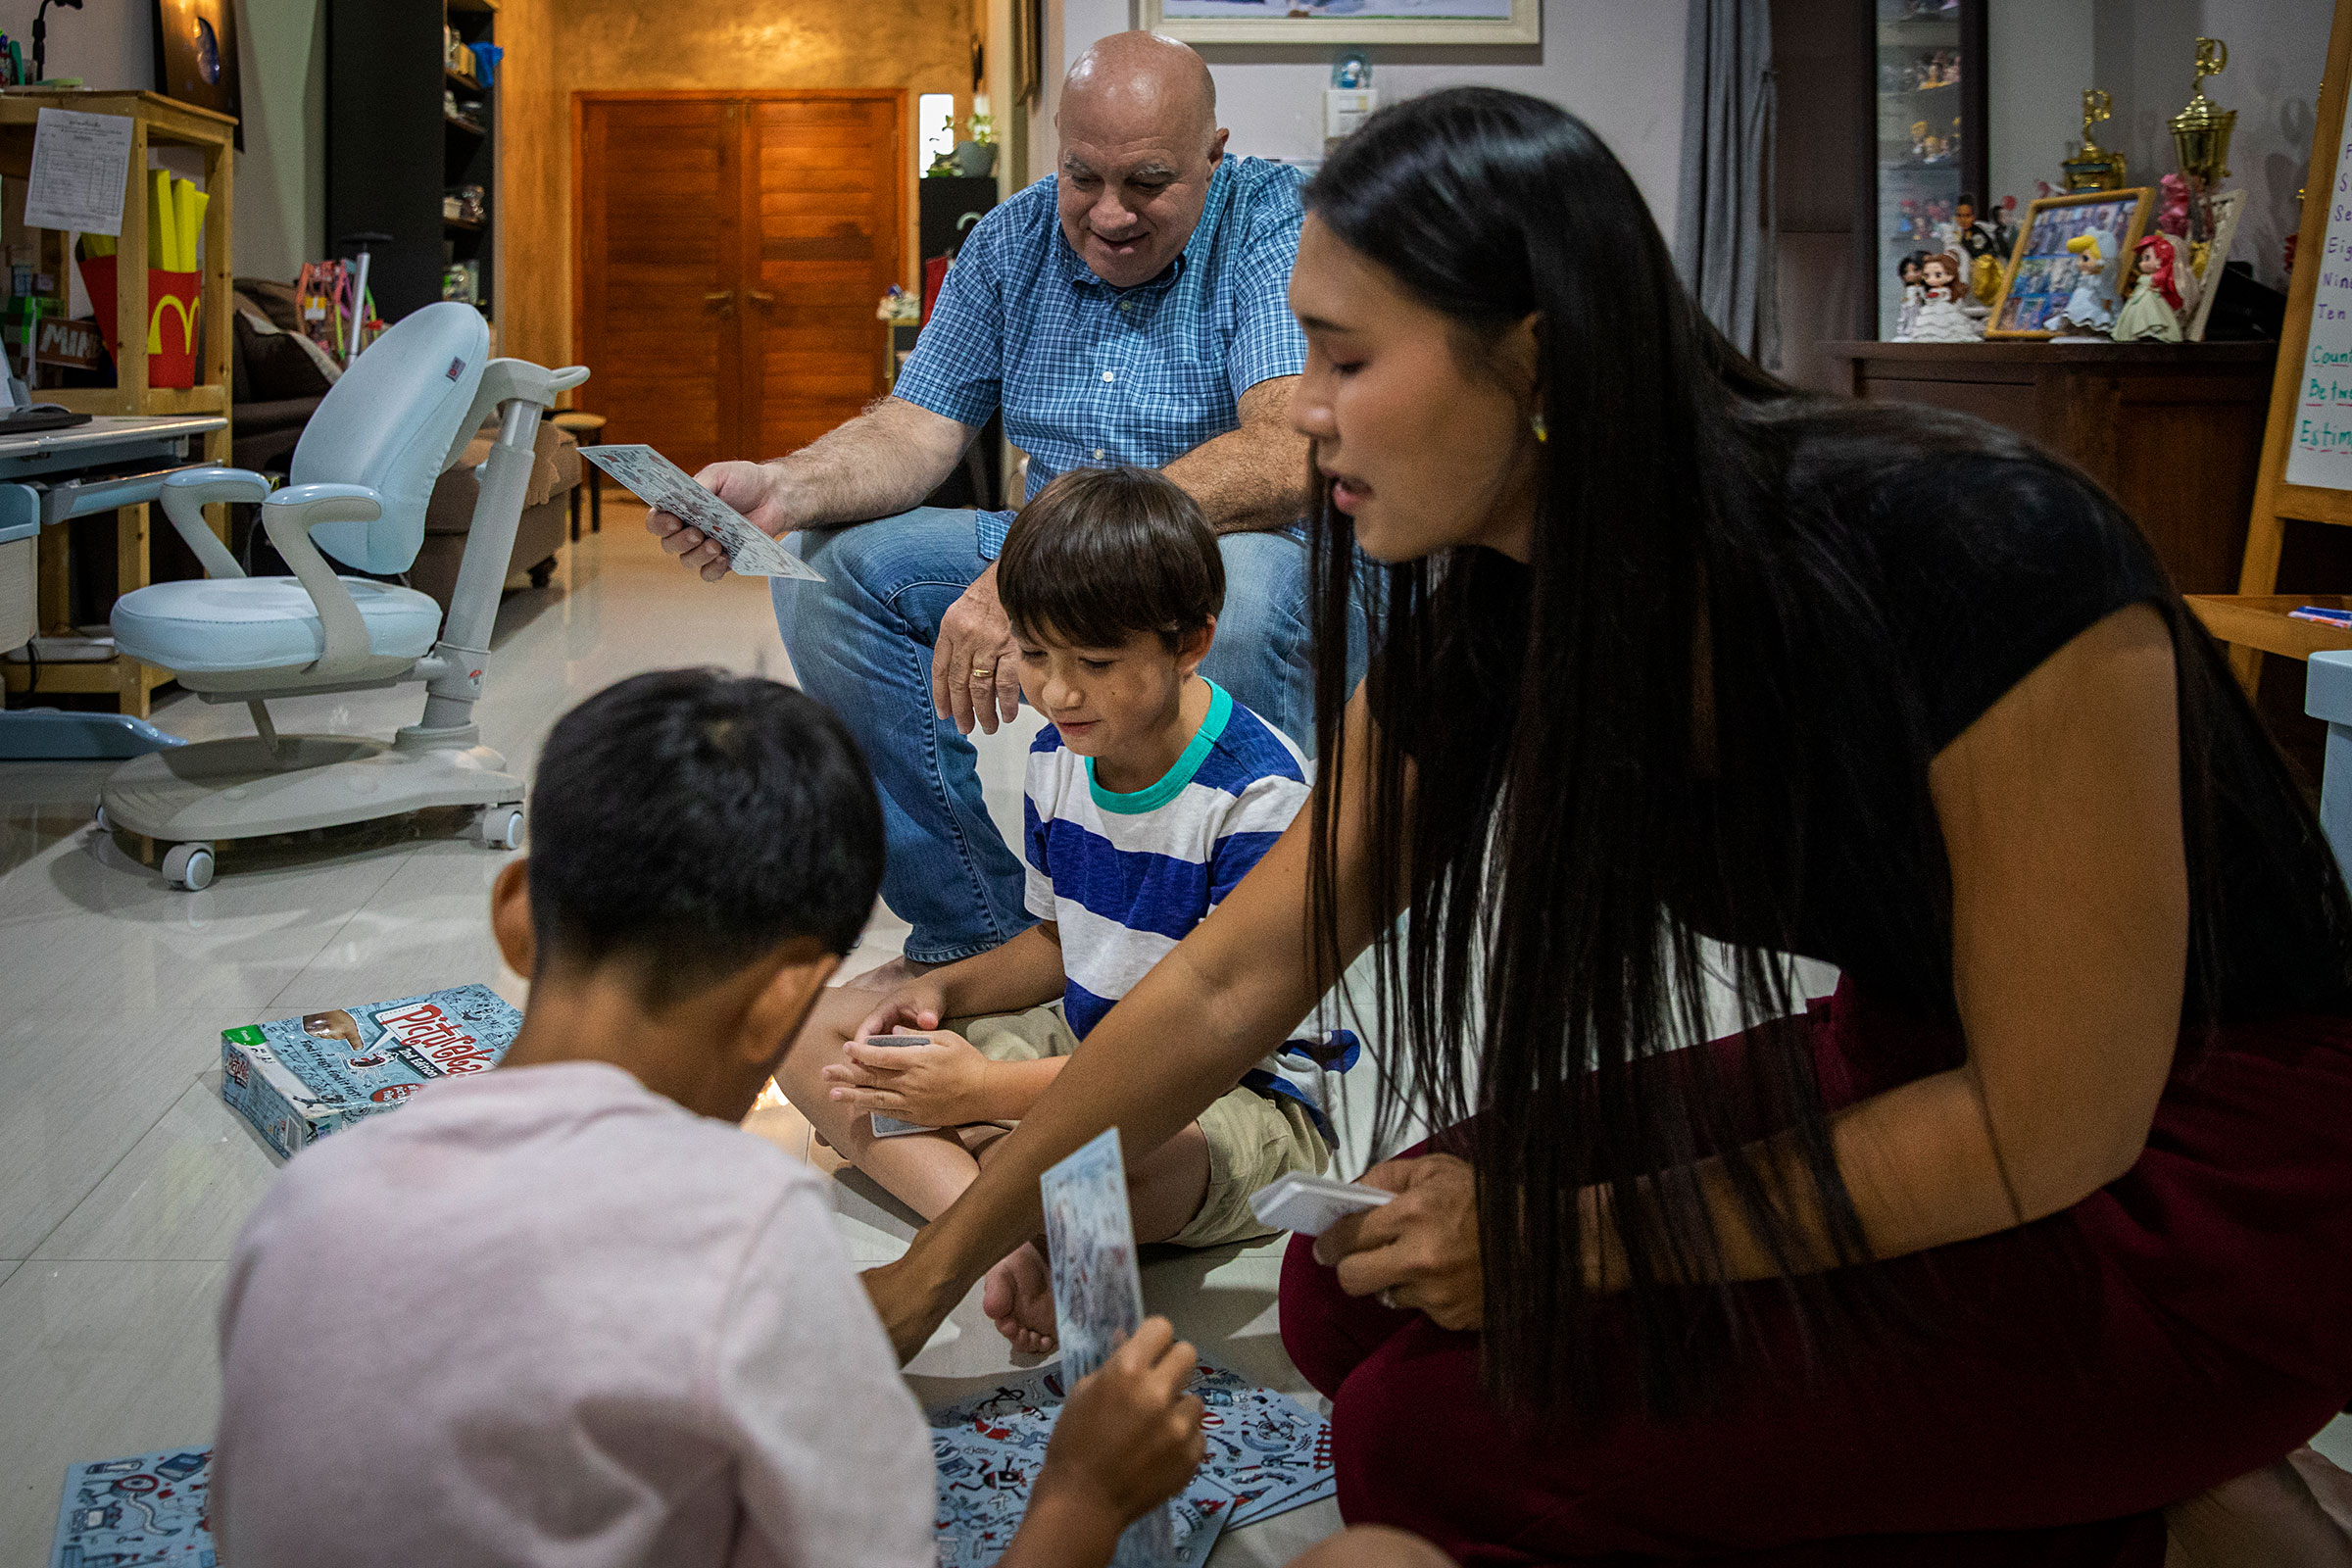 Ariya "Gina" Milintanapa and Lee Battia play a board game called 'Pictureka!' with their children their family's home on July 12, 2022 in Bangkok, Thailand.  Ariya "Gina" Milintanapa, a Thai transgender woman, and her American partner, Lee Battia, live in Bangkok, Thailand with their two children, Chene, 8, and Charlie, 6. Although the couple has been together for nearly 20 years, due to the country's conservative marriage laws, Gina and Lee have been unable to officially marry in Thailand, leading to struggles over joint guardianship of their two children. Under current laws, Lee currently has guardianship rights to Chene and Gina has guardianship rights to Charlie. While globally Thailand is considered an inclusive and accepting country for LGBTQ communities and tourists, those living in Thailand struggle for equal rights as courts historically ruled against same-sex marriage. Couples like Gina and Lee hold out hope for joint custody as Thailand's parliament preliminarily approved a bill to recognize same-sex marriage on June 15, 2022. Photo by Lauren DeCicca for TIME